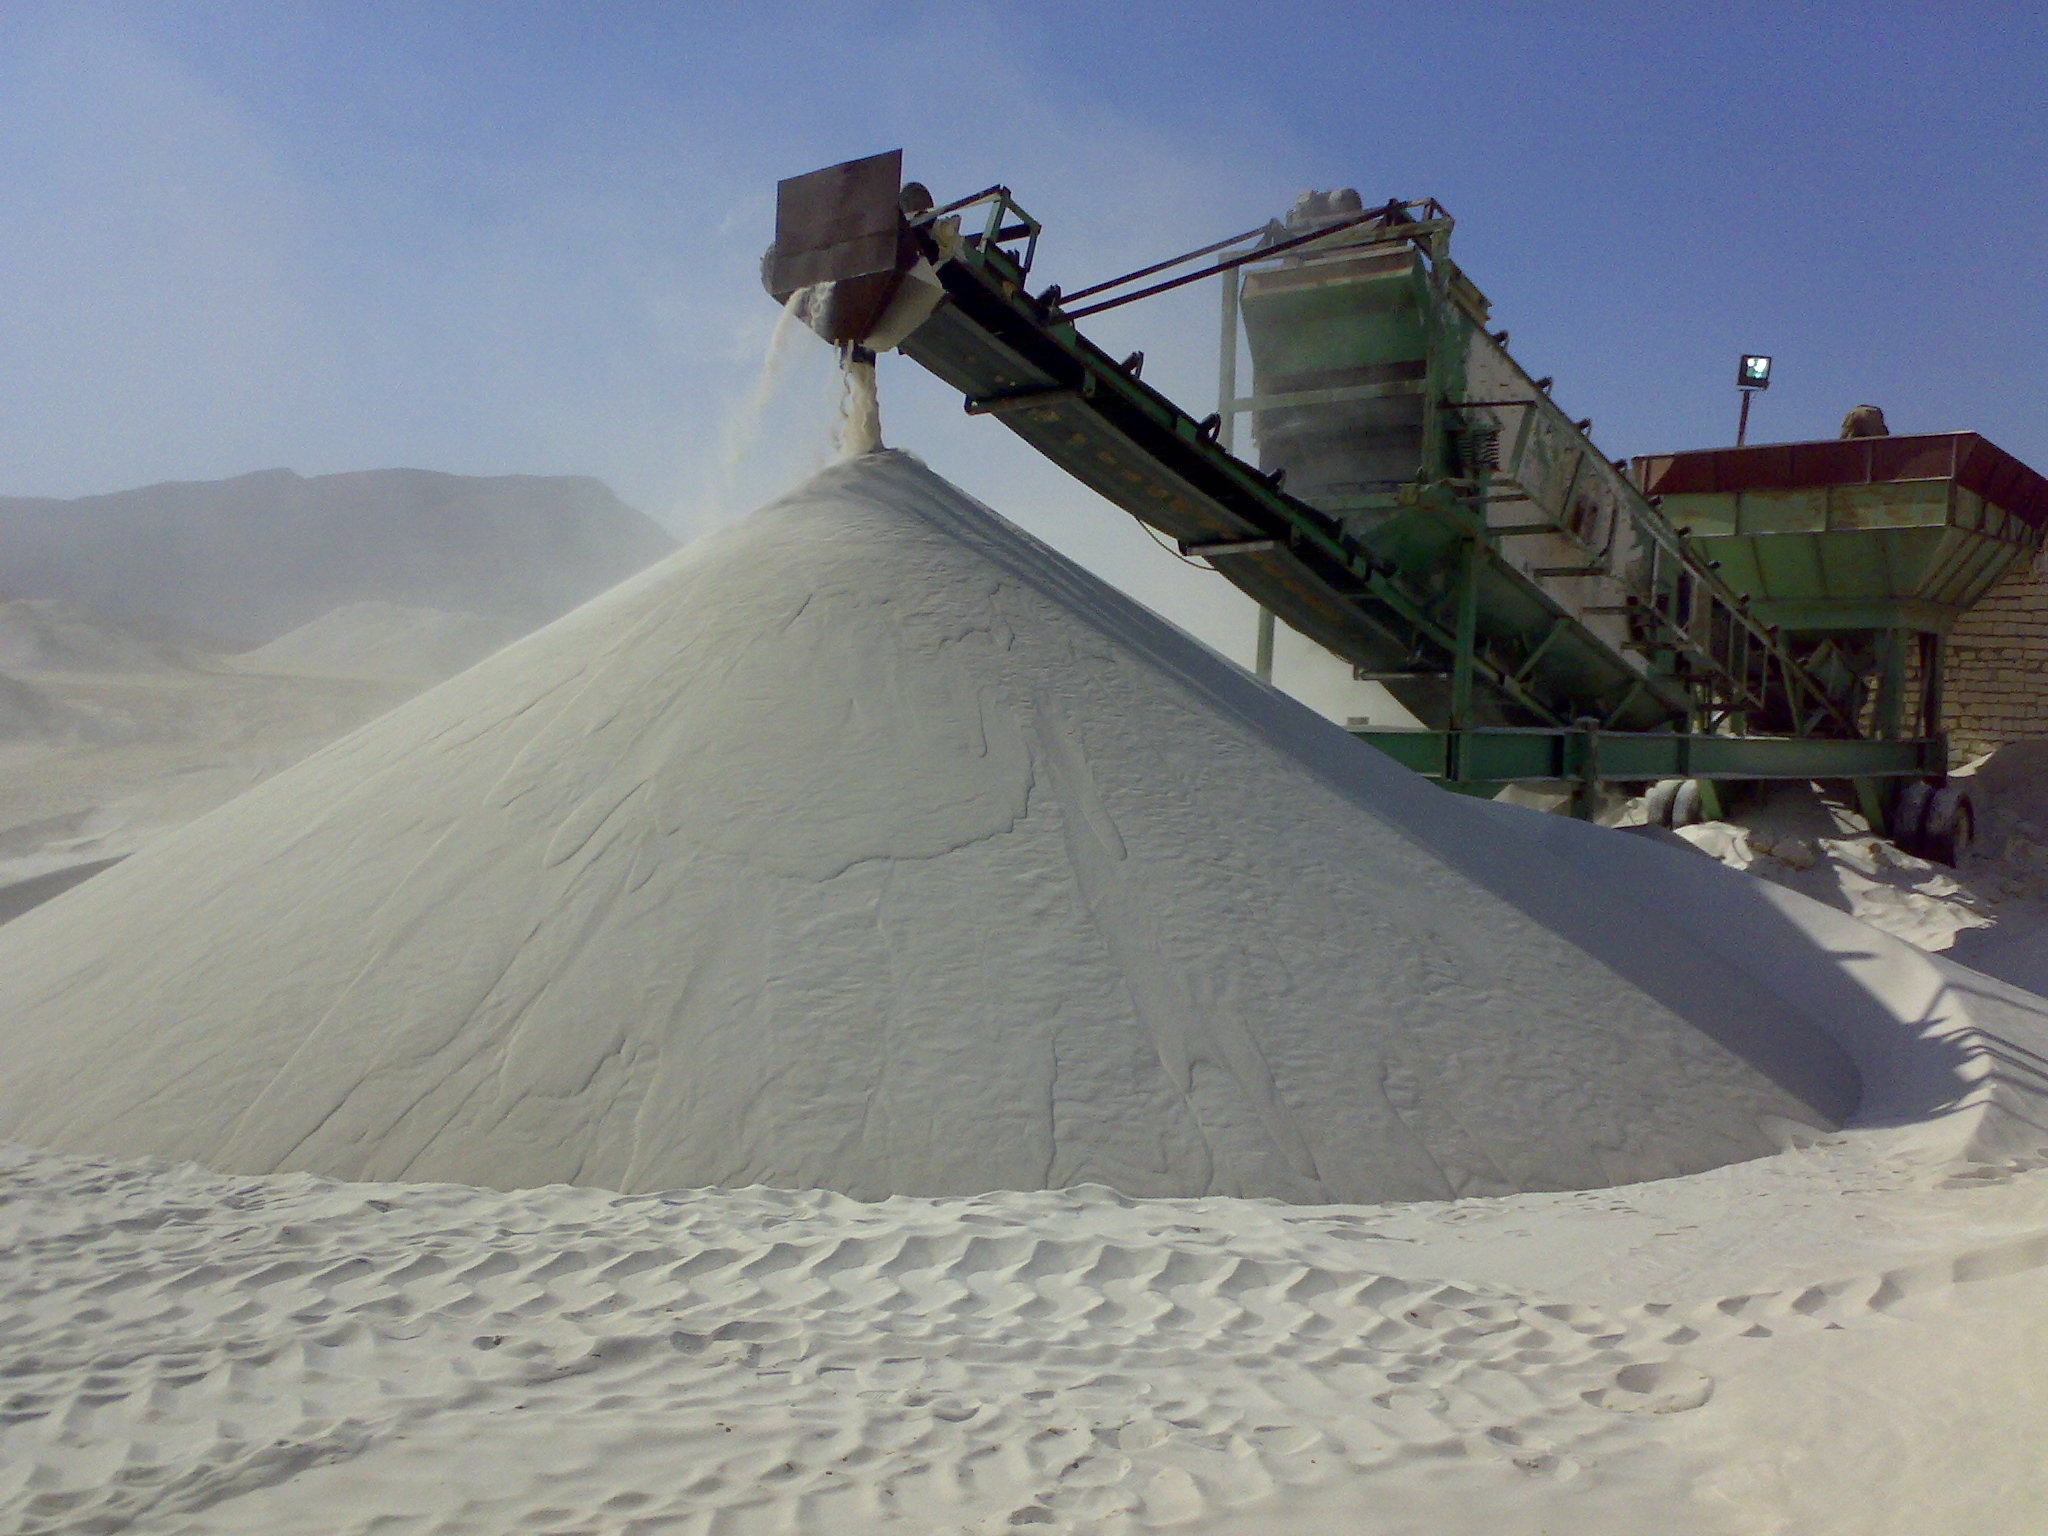 What is Silica Sand